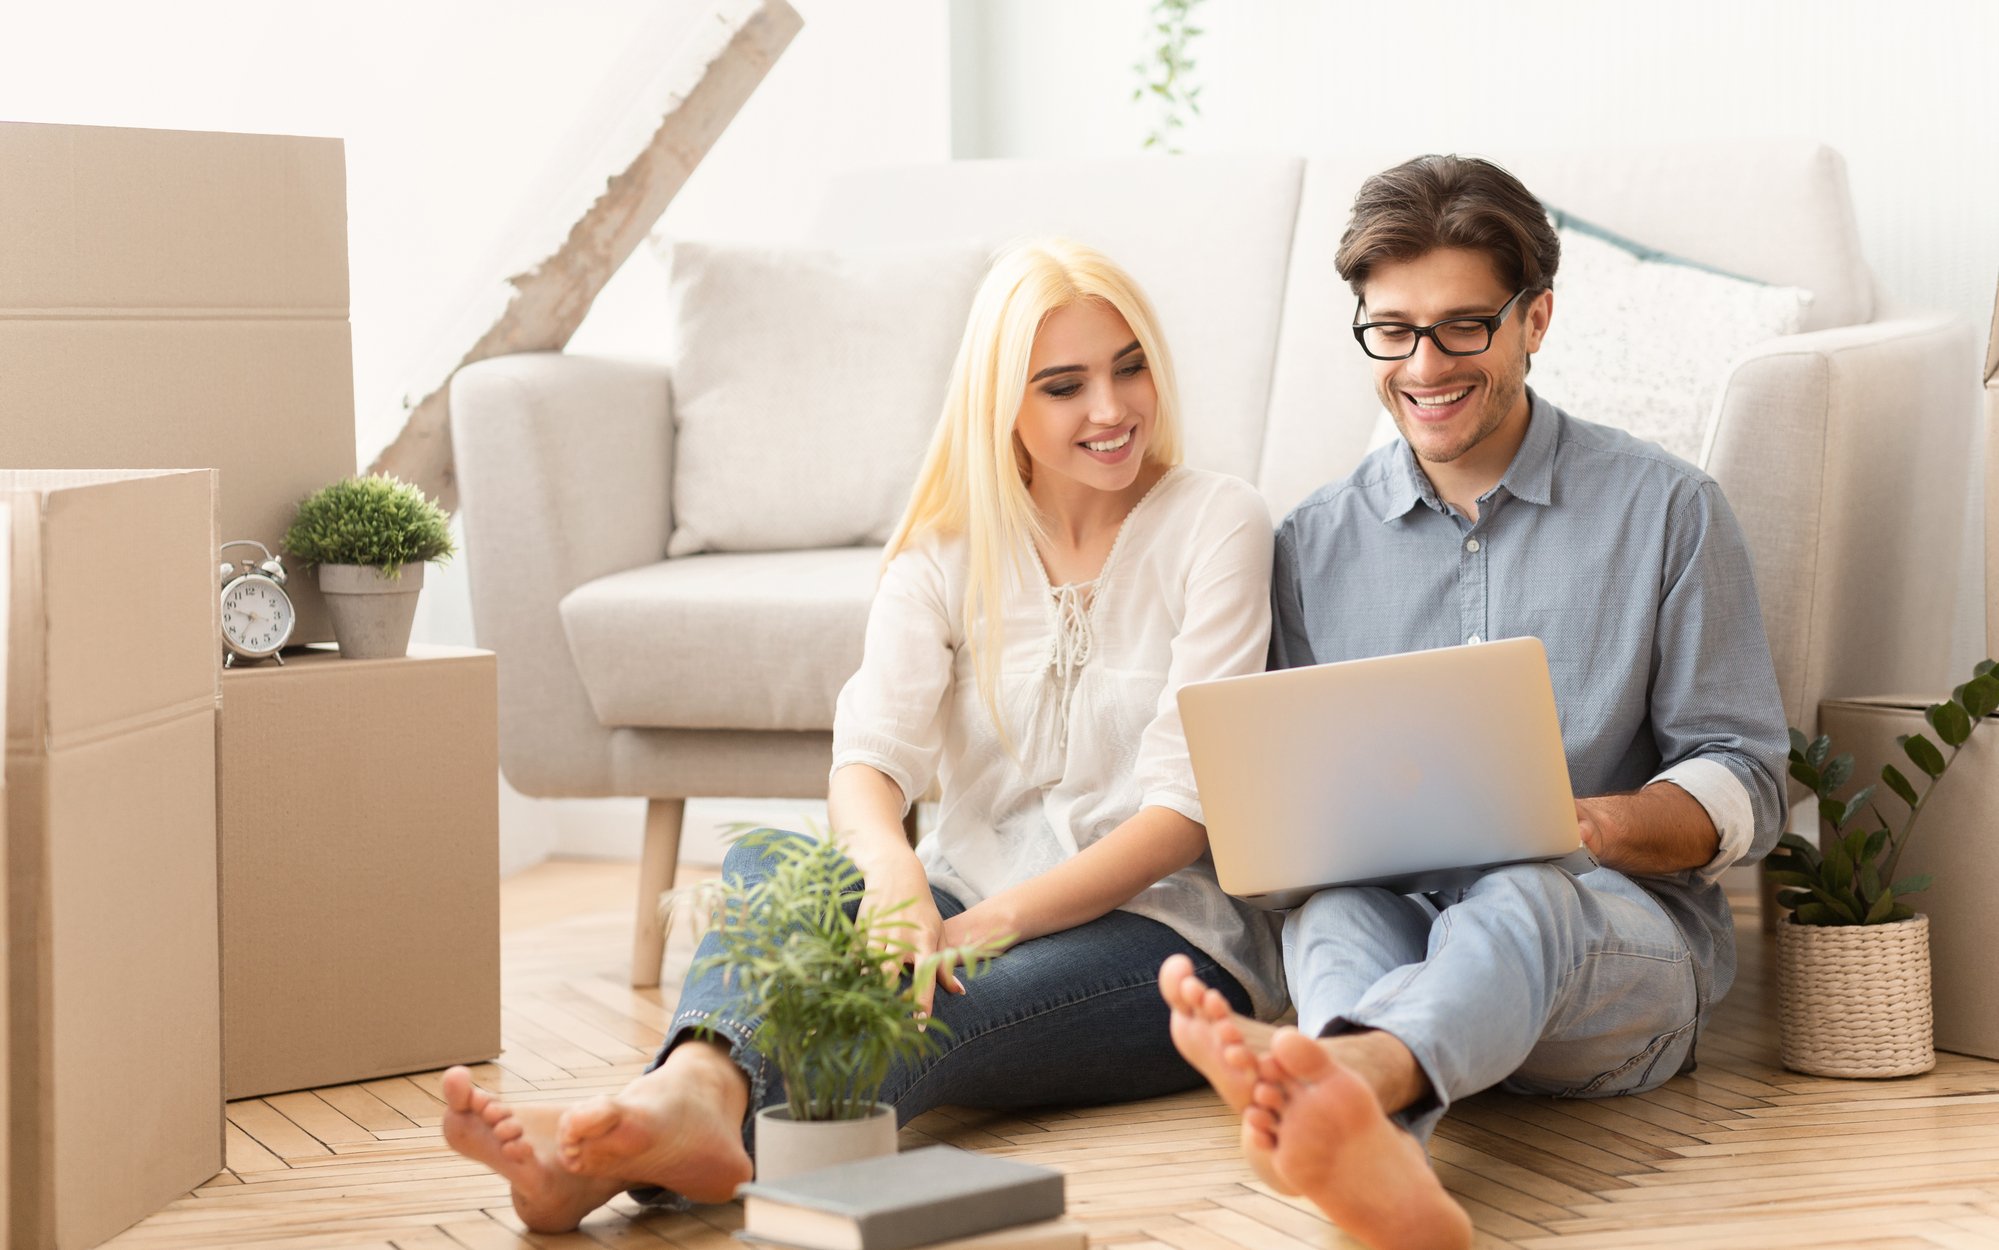 Cheerful couple sitting on floor using laptop in new house